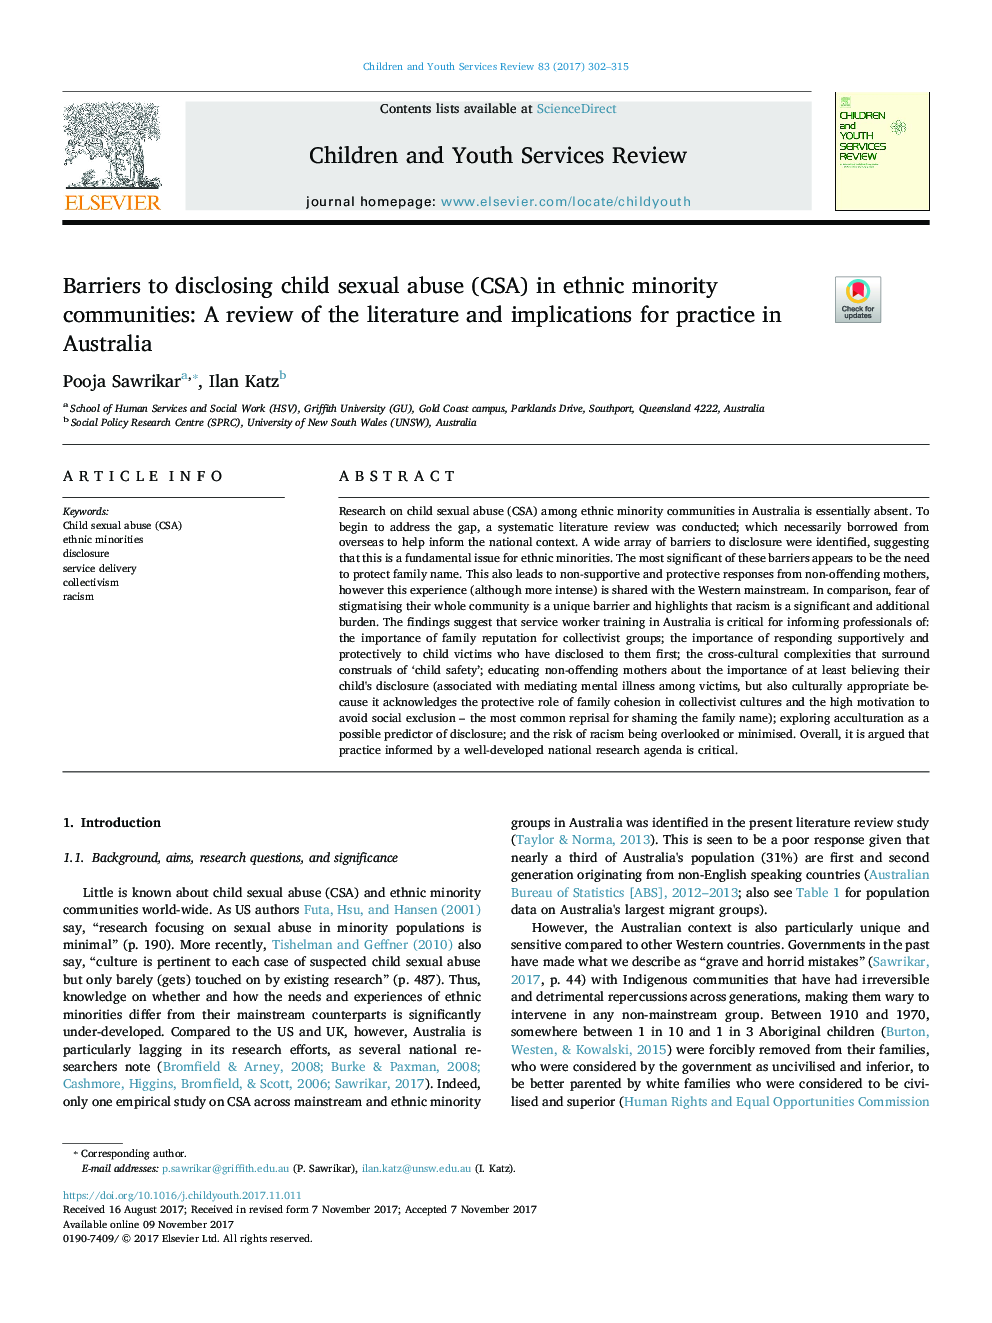 Barriers to disclosing child sexual abuse (CSA) in ethnic minority communities: A review of the literature and implications for practice in Australia